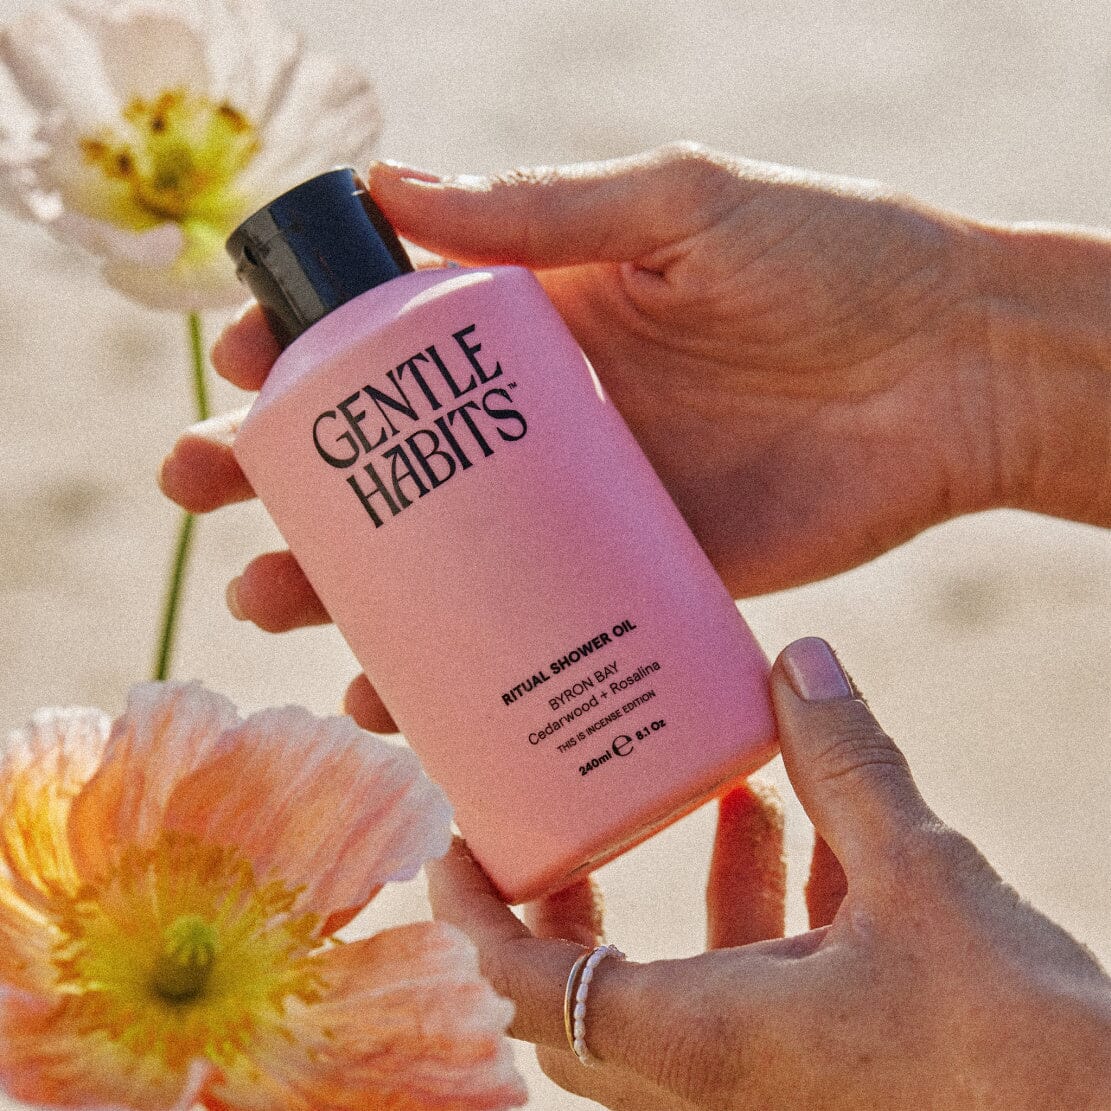 Same Day Gift Delivery Melbourne | Australia-wide Gift Delivery | Gentle Habits Ritual Shower Oils